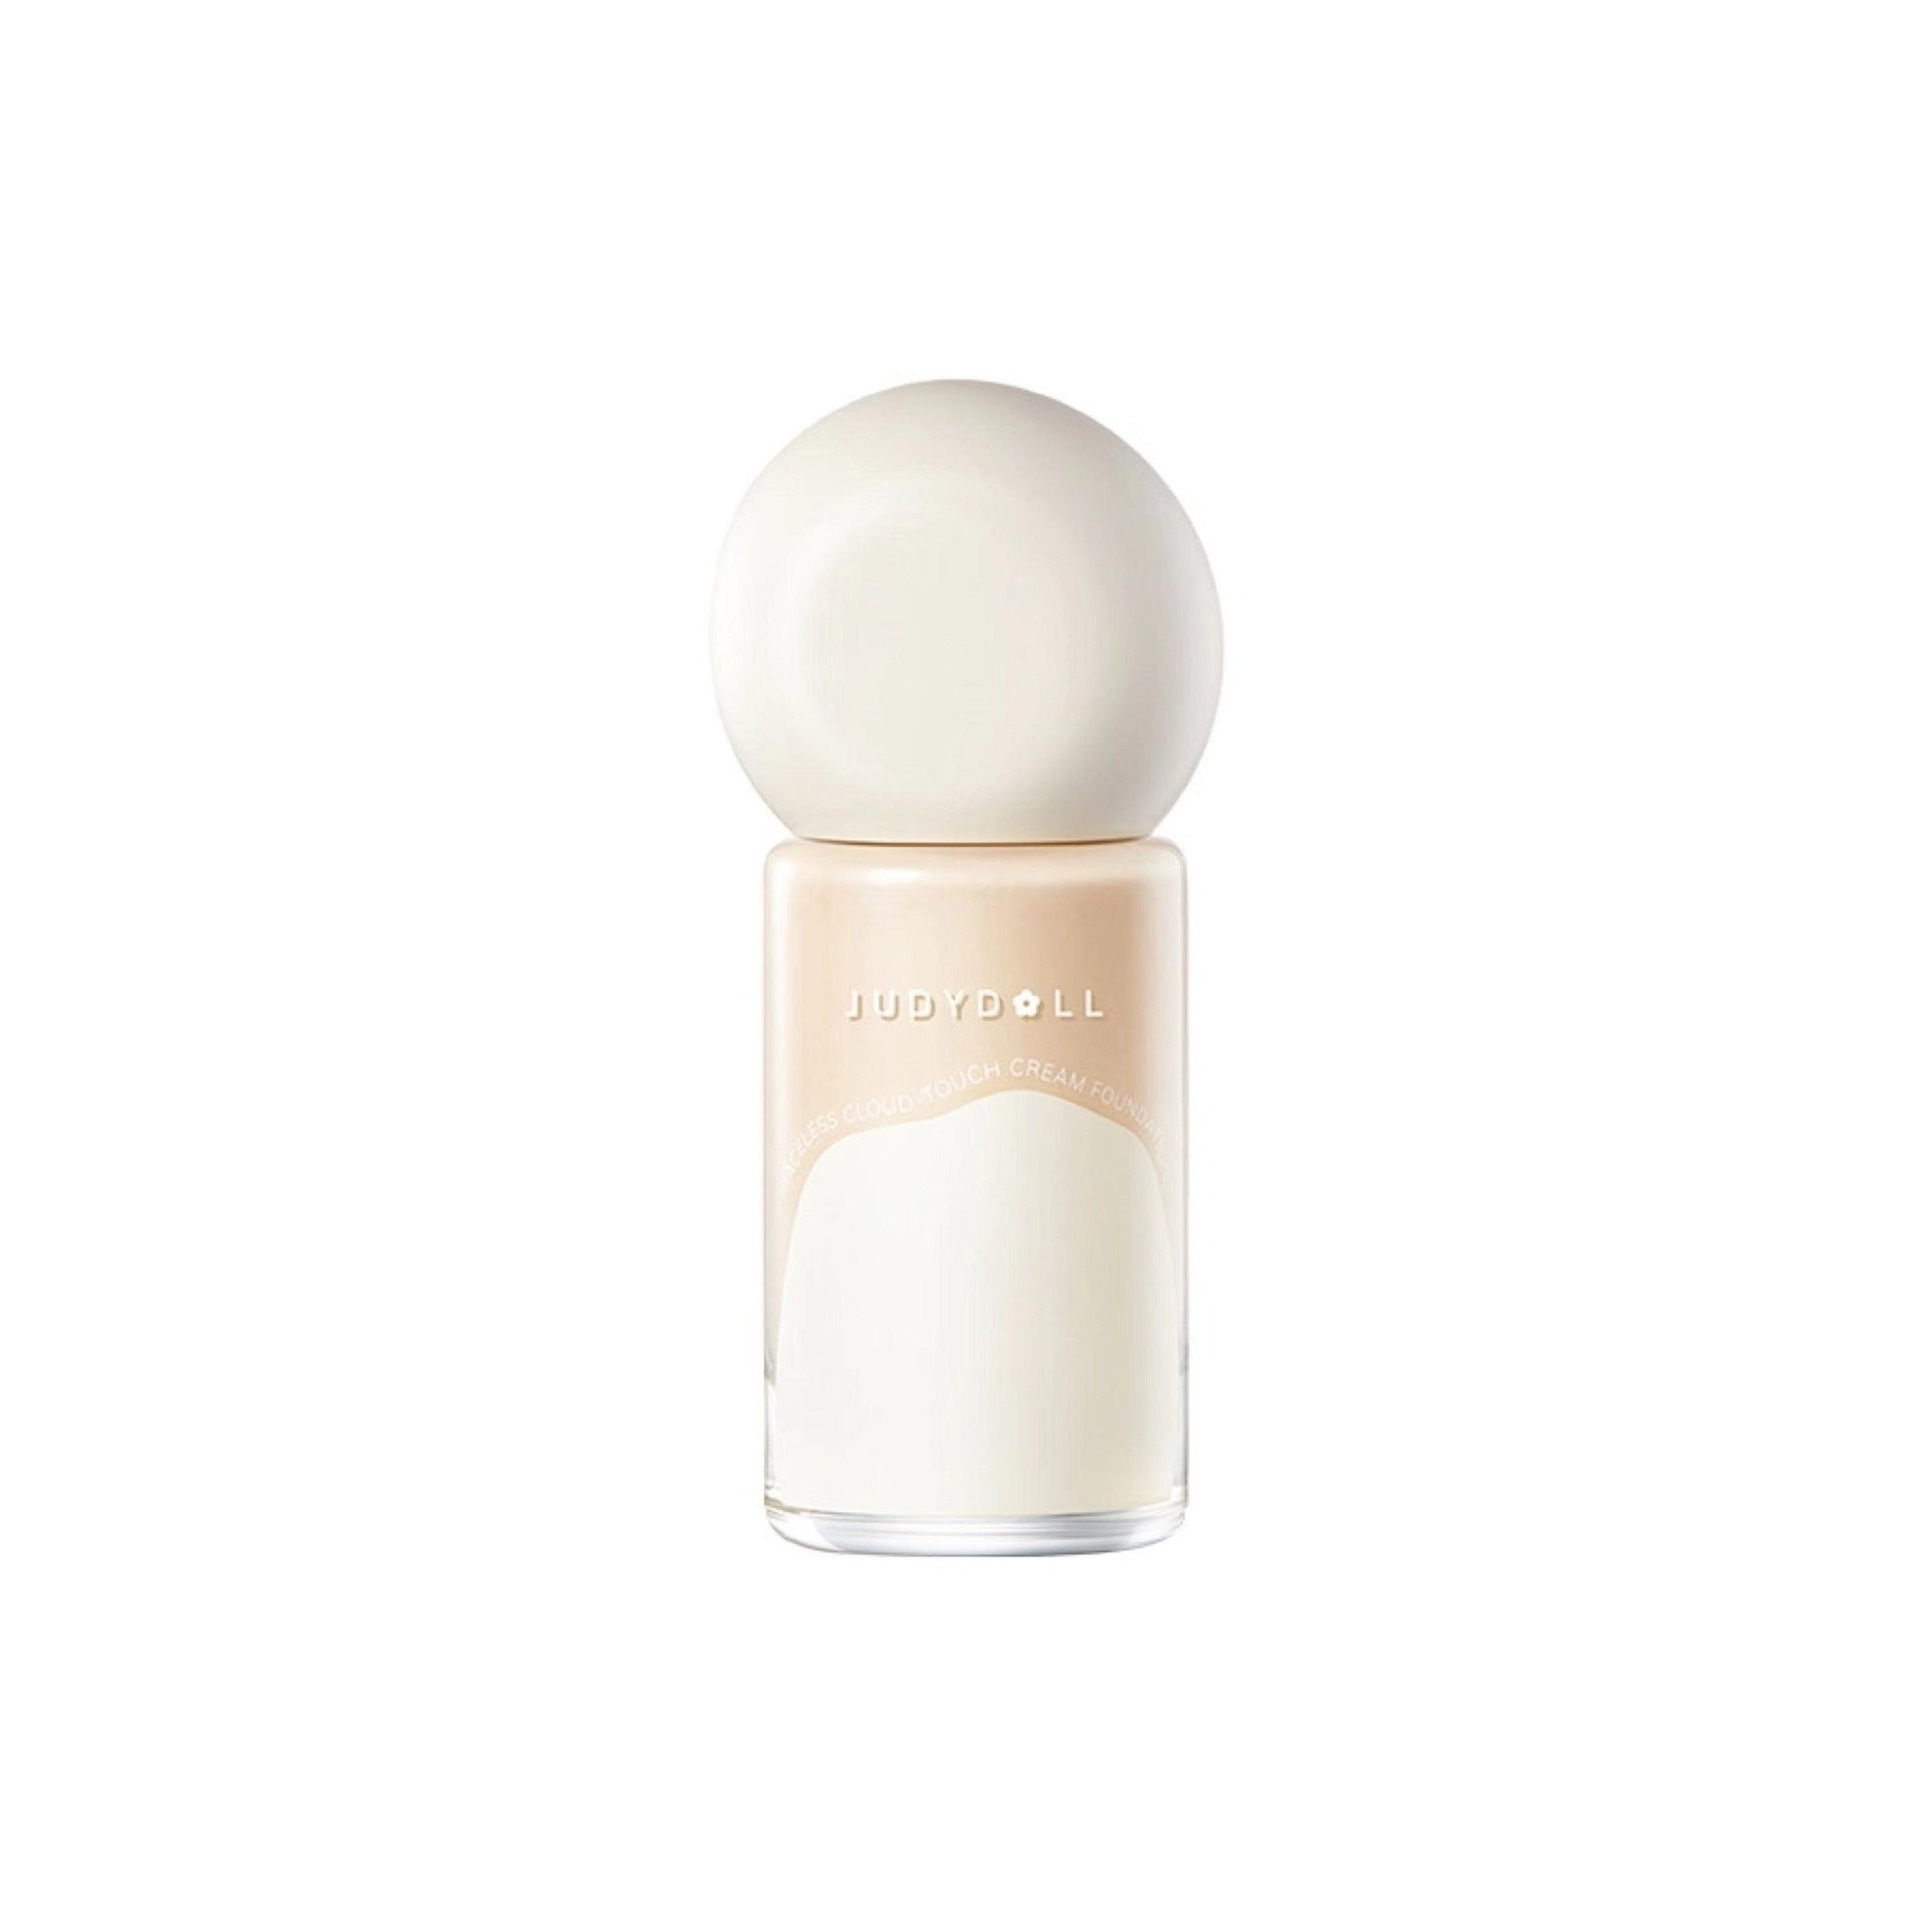 Judydoll Traceless Cloud Touch Cream Foundation Chic Decent Beauty